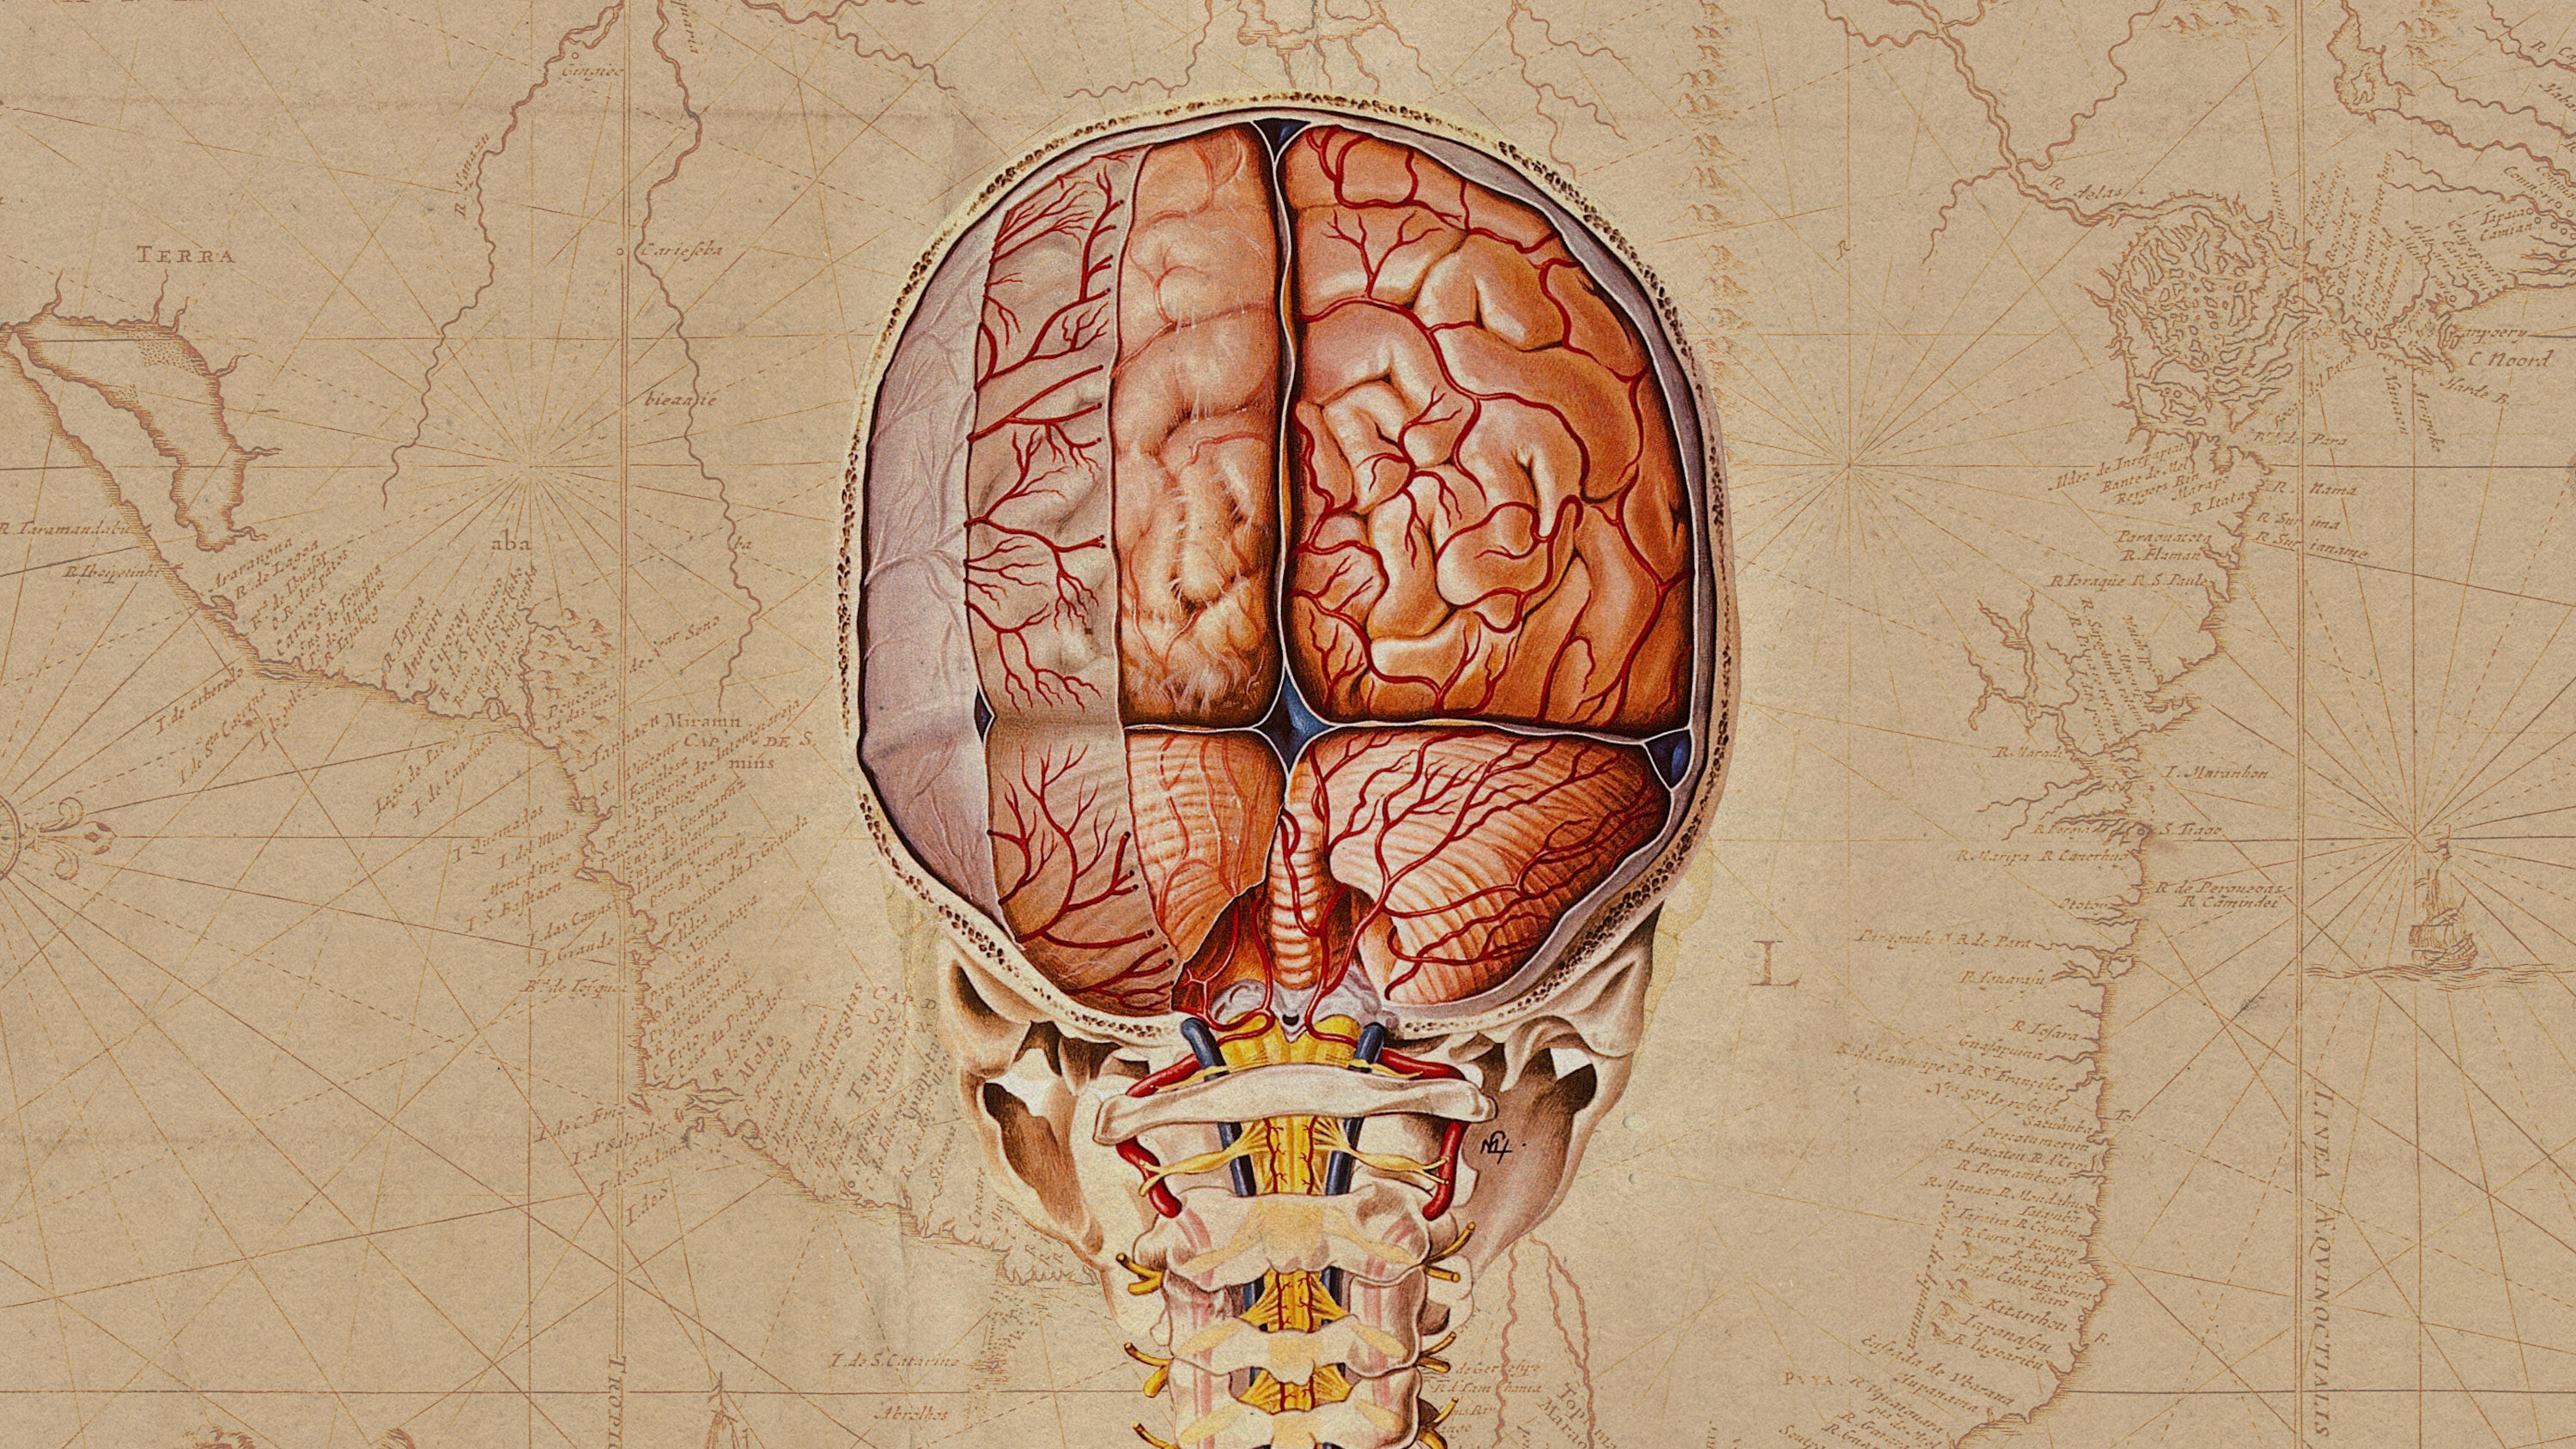 color lithograph of the rear cross-section of a brain and spine superimposed on an old map